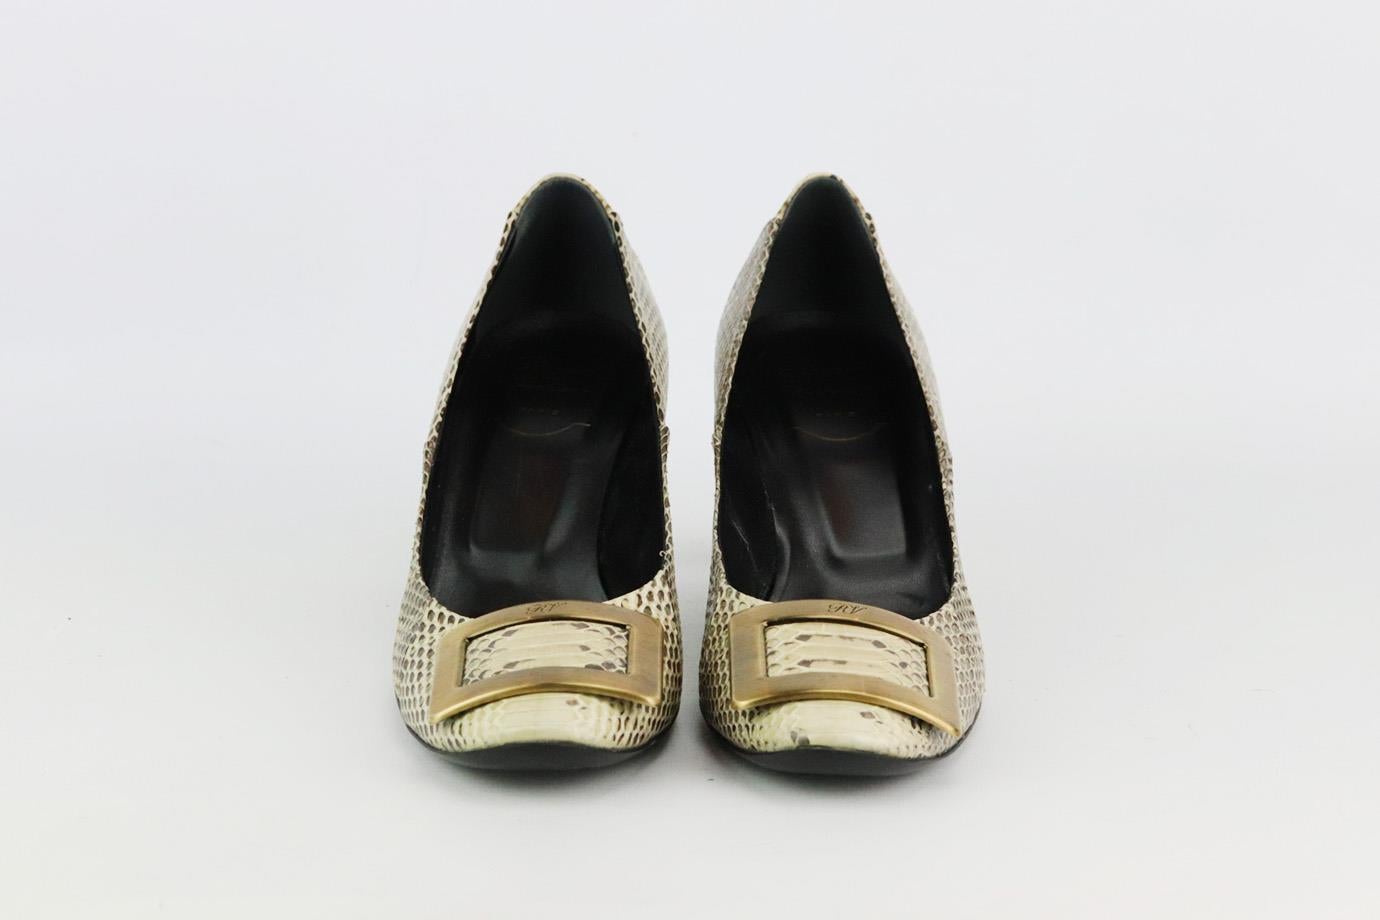 These pumps by Roger Vivier are an elegant re-creation of the founder's original 1965 design, they're made from cream and grey python and embellished with a bronze-tone signature buckle that tops the rounded toe. Heel measures approximately 50 mm/ 2